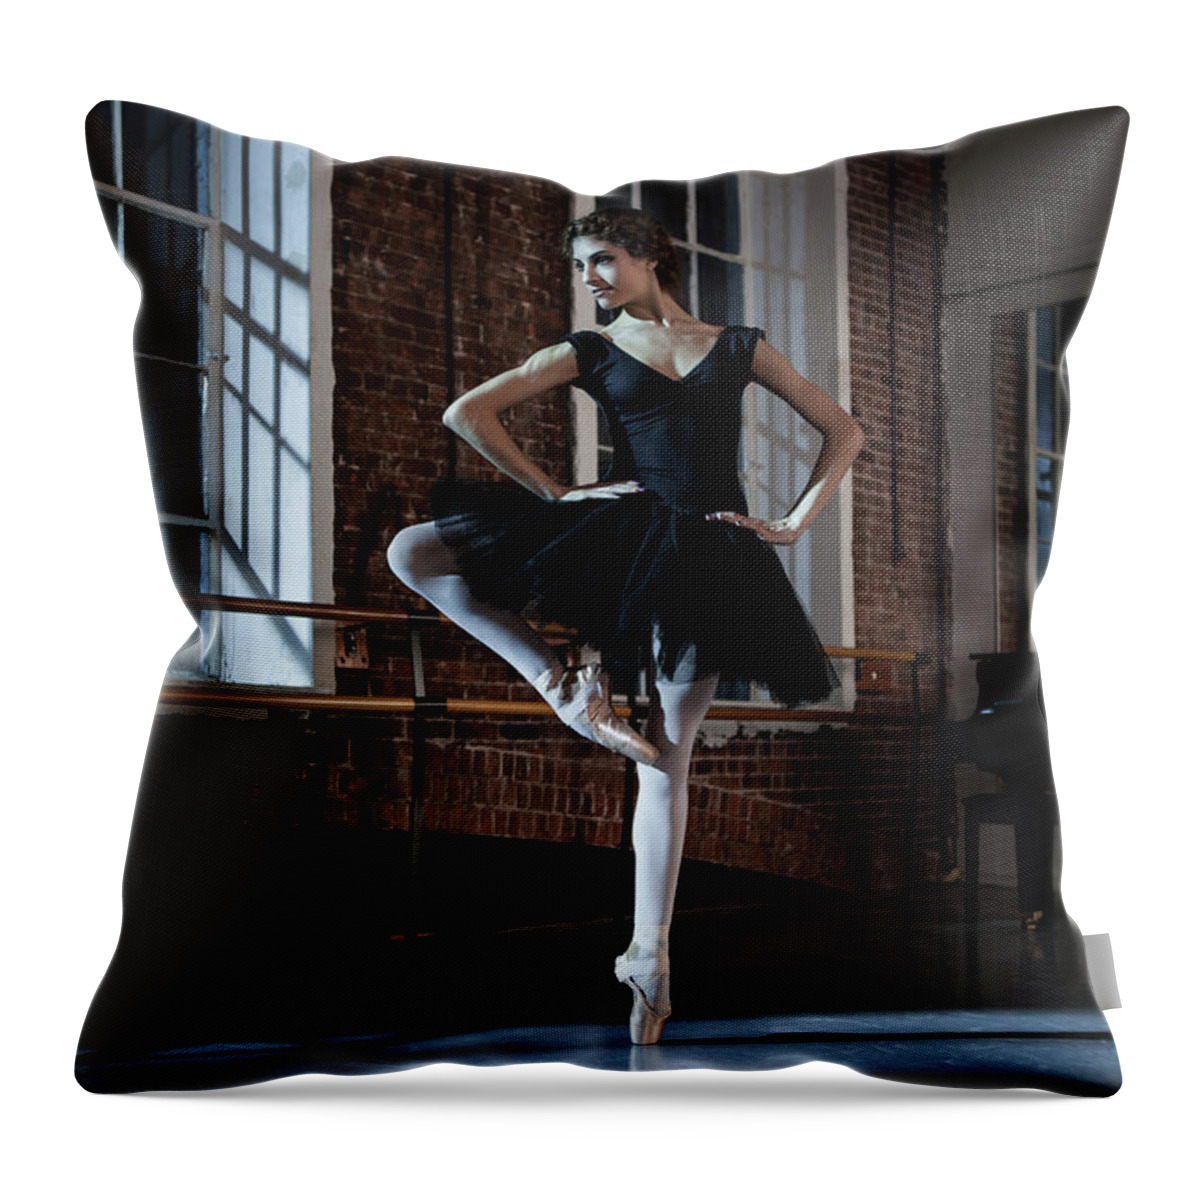 Ballet Dancer Throw Pillow featuring the photograph Ballerina Performing Passe Devant In by Nisian Hughes